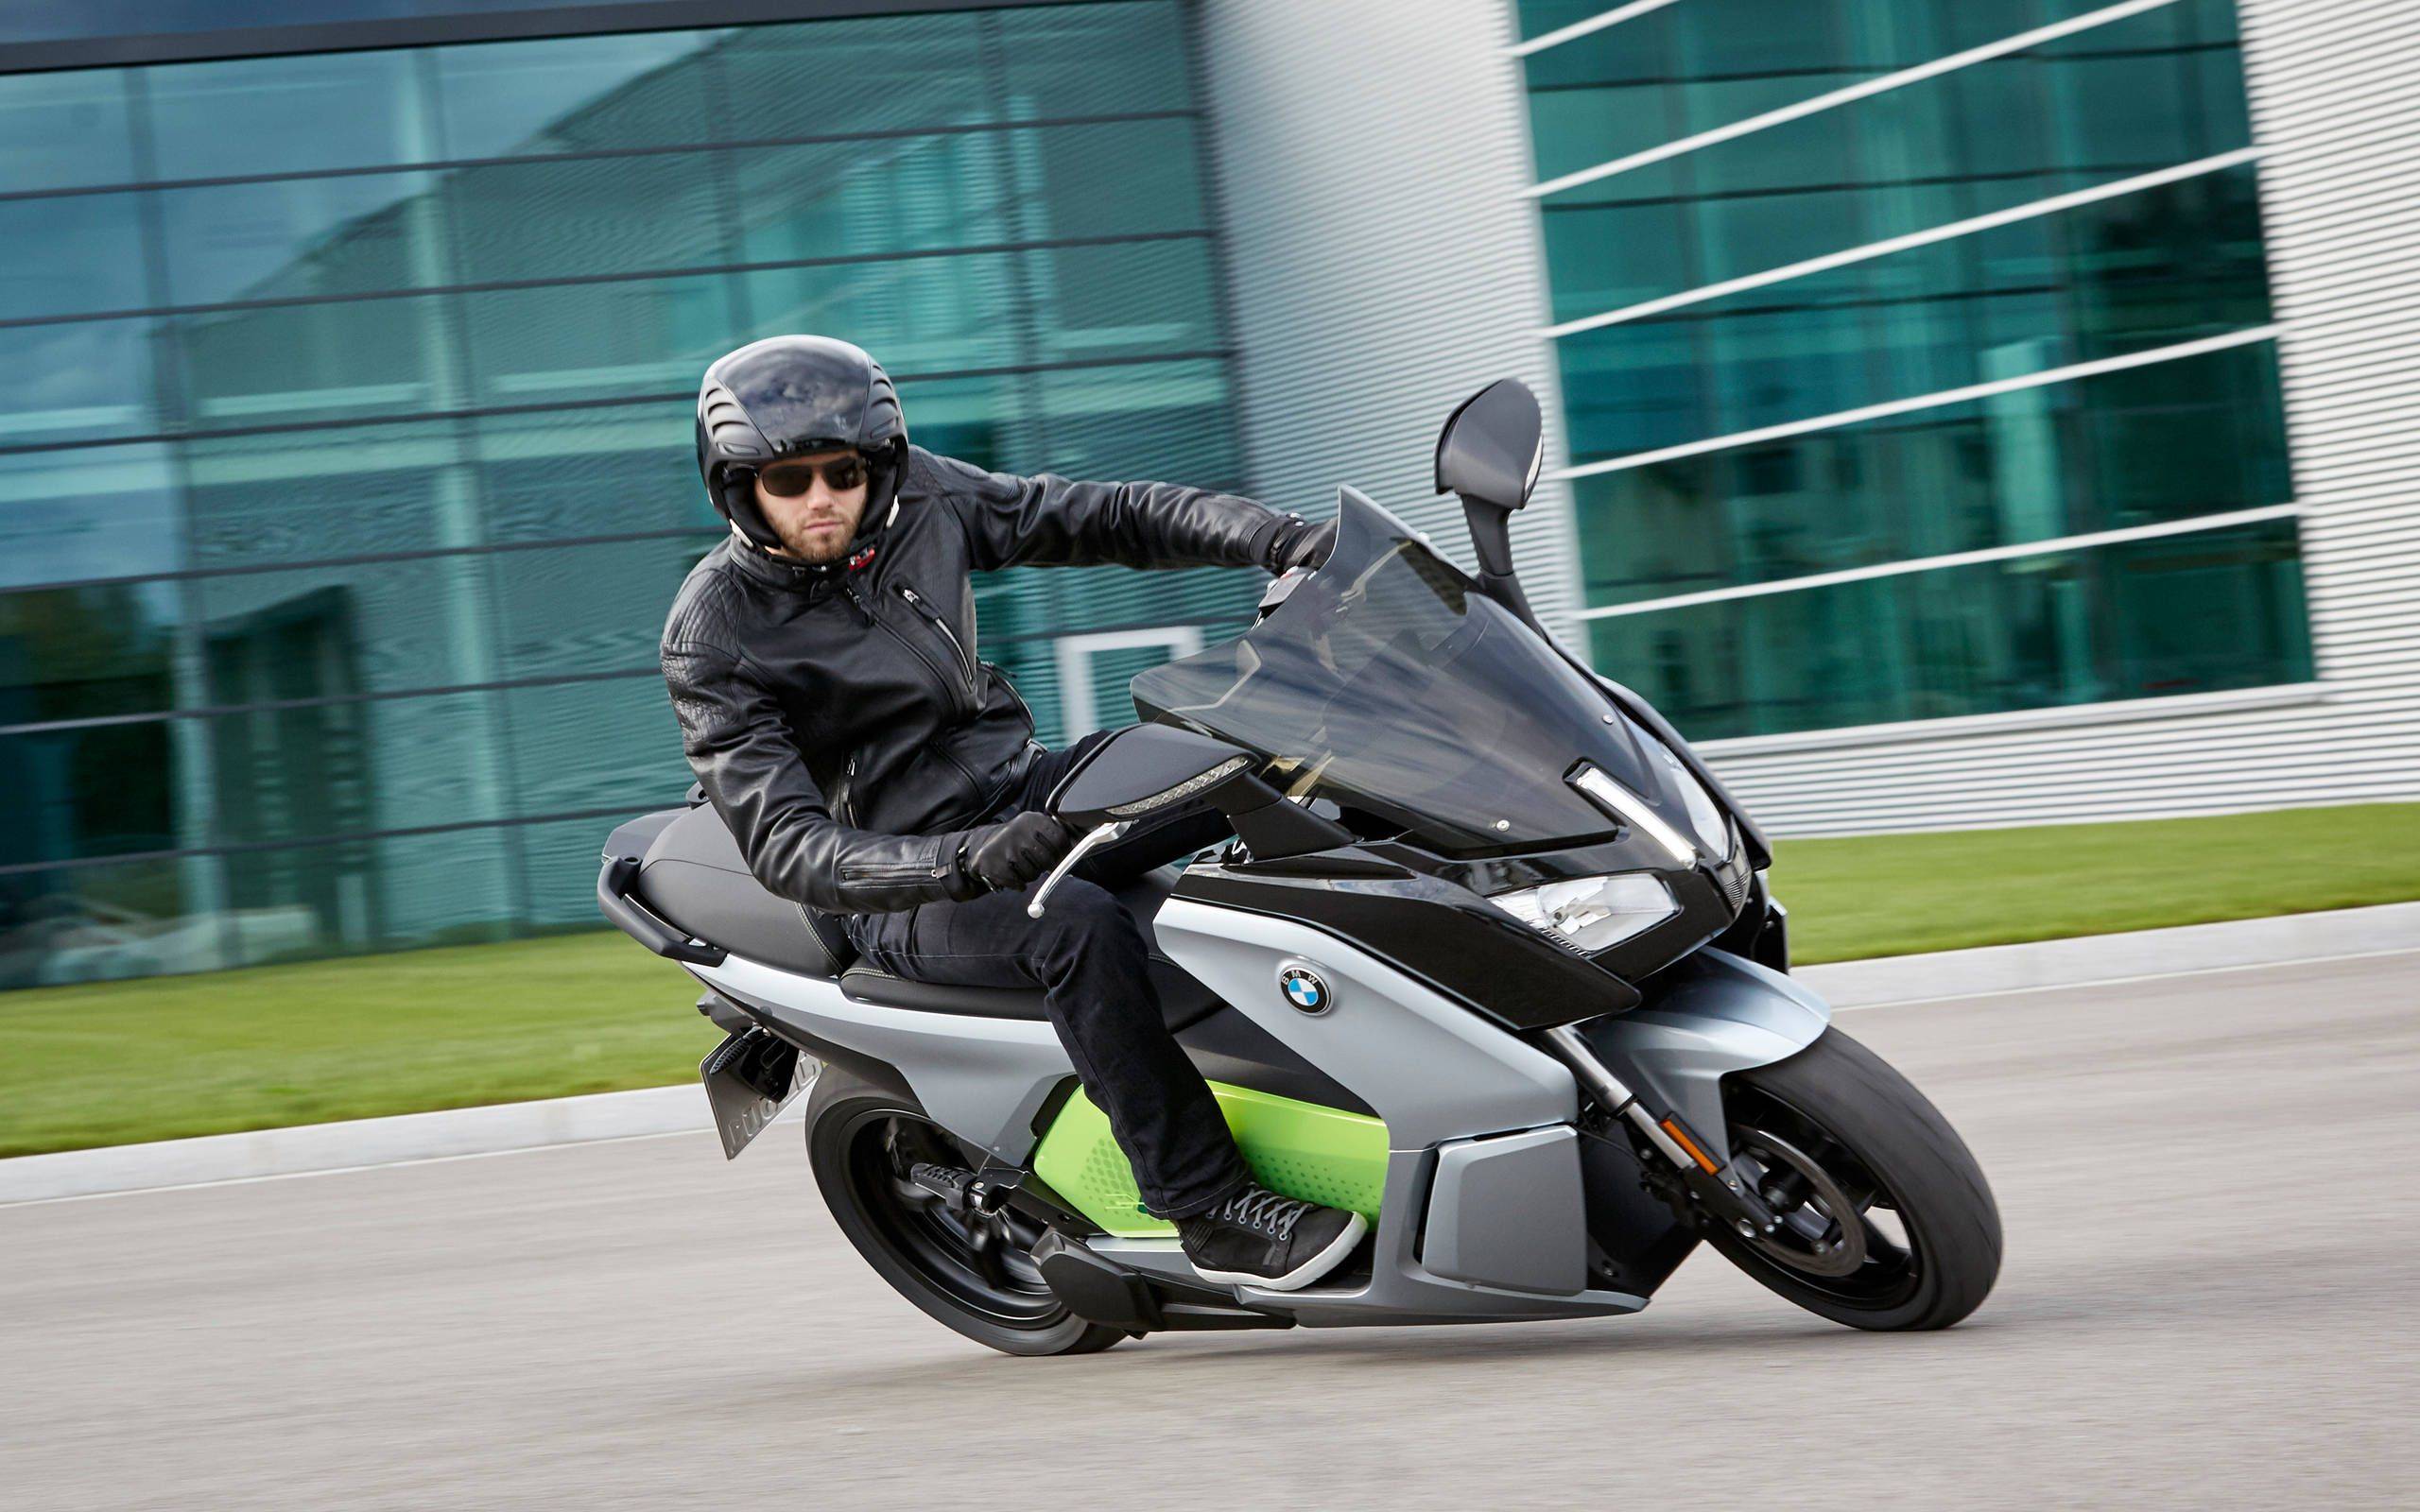 Bmw c evolution (2014-2019) - review & buying guide